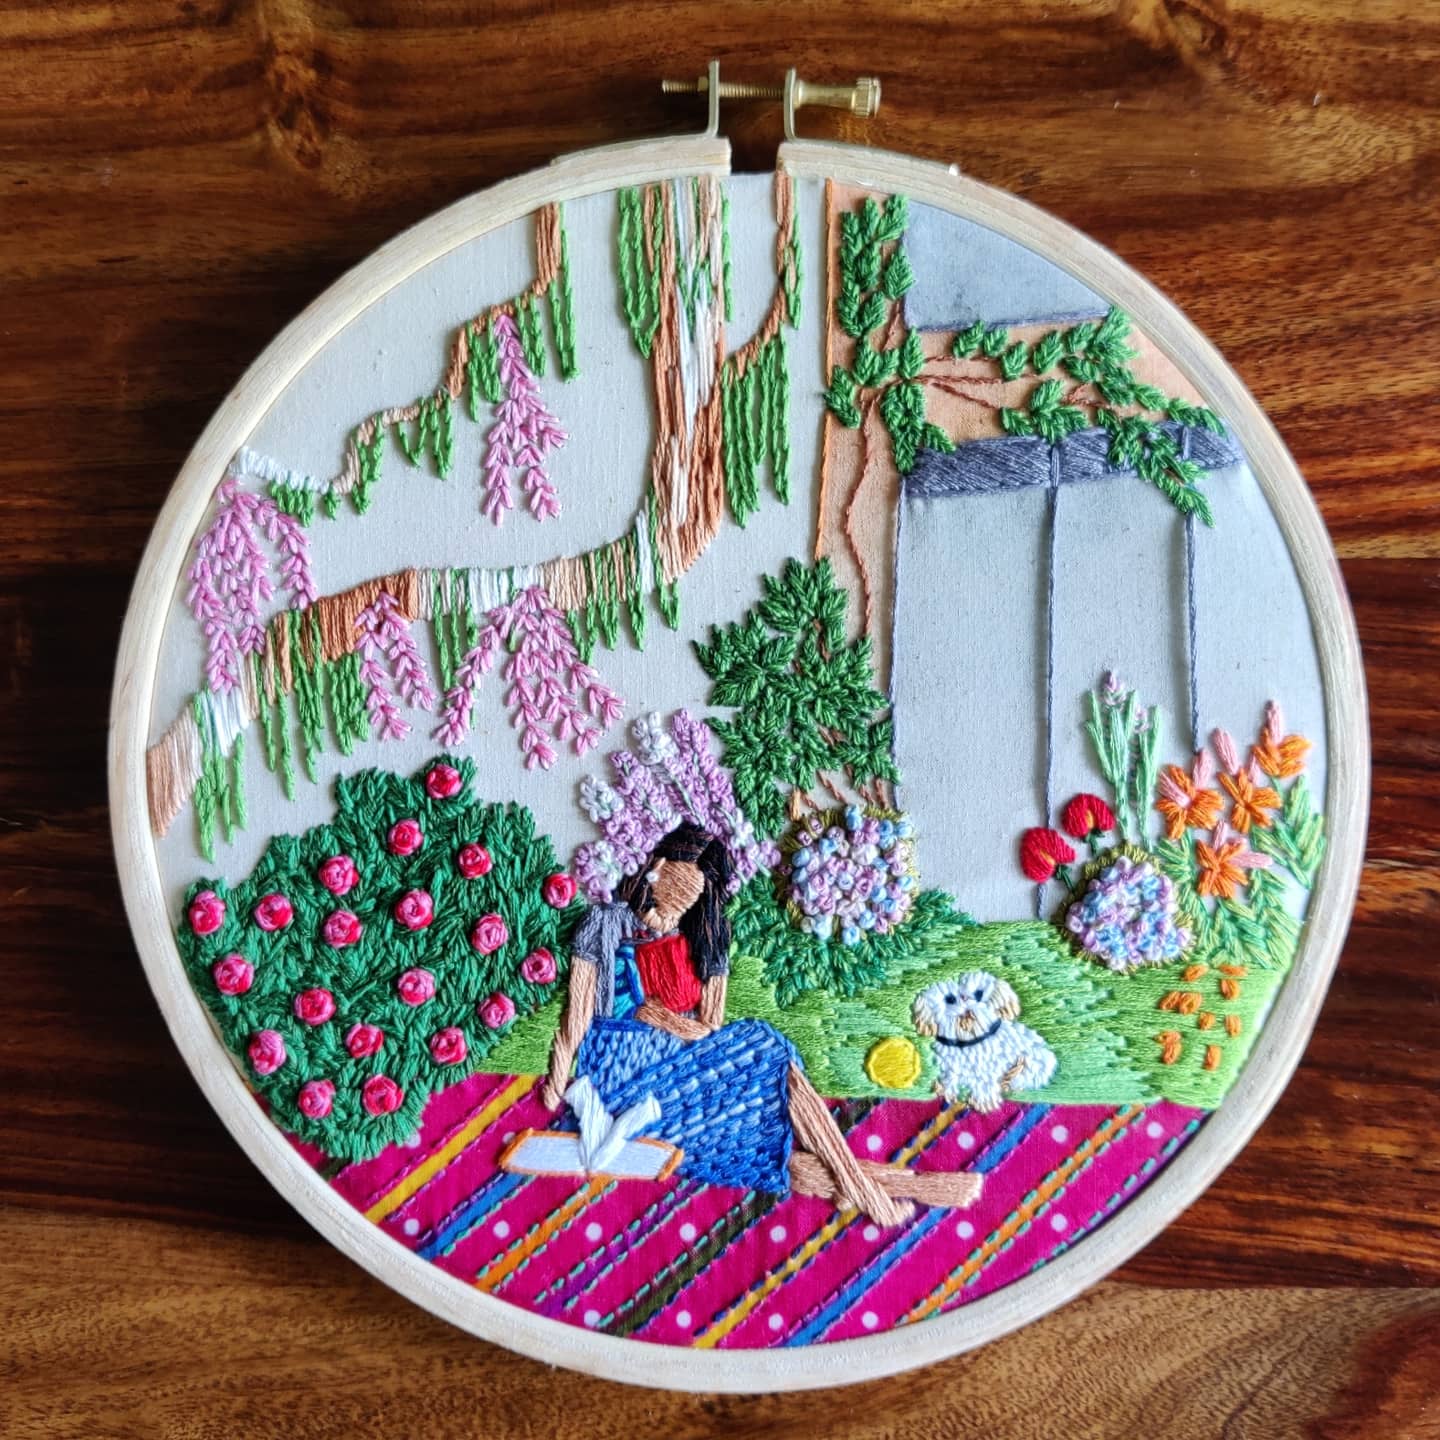 Embroidery Art of Daily Life by Anuradha Bhaumick